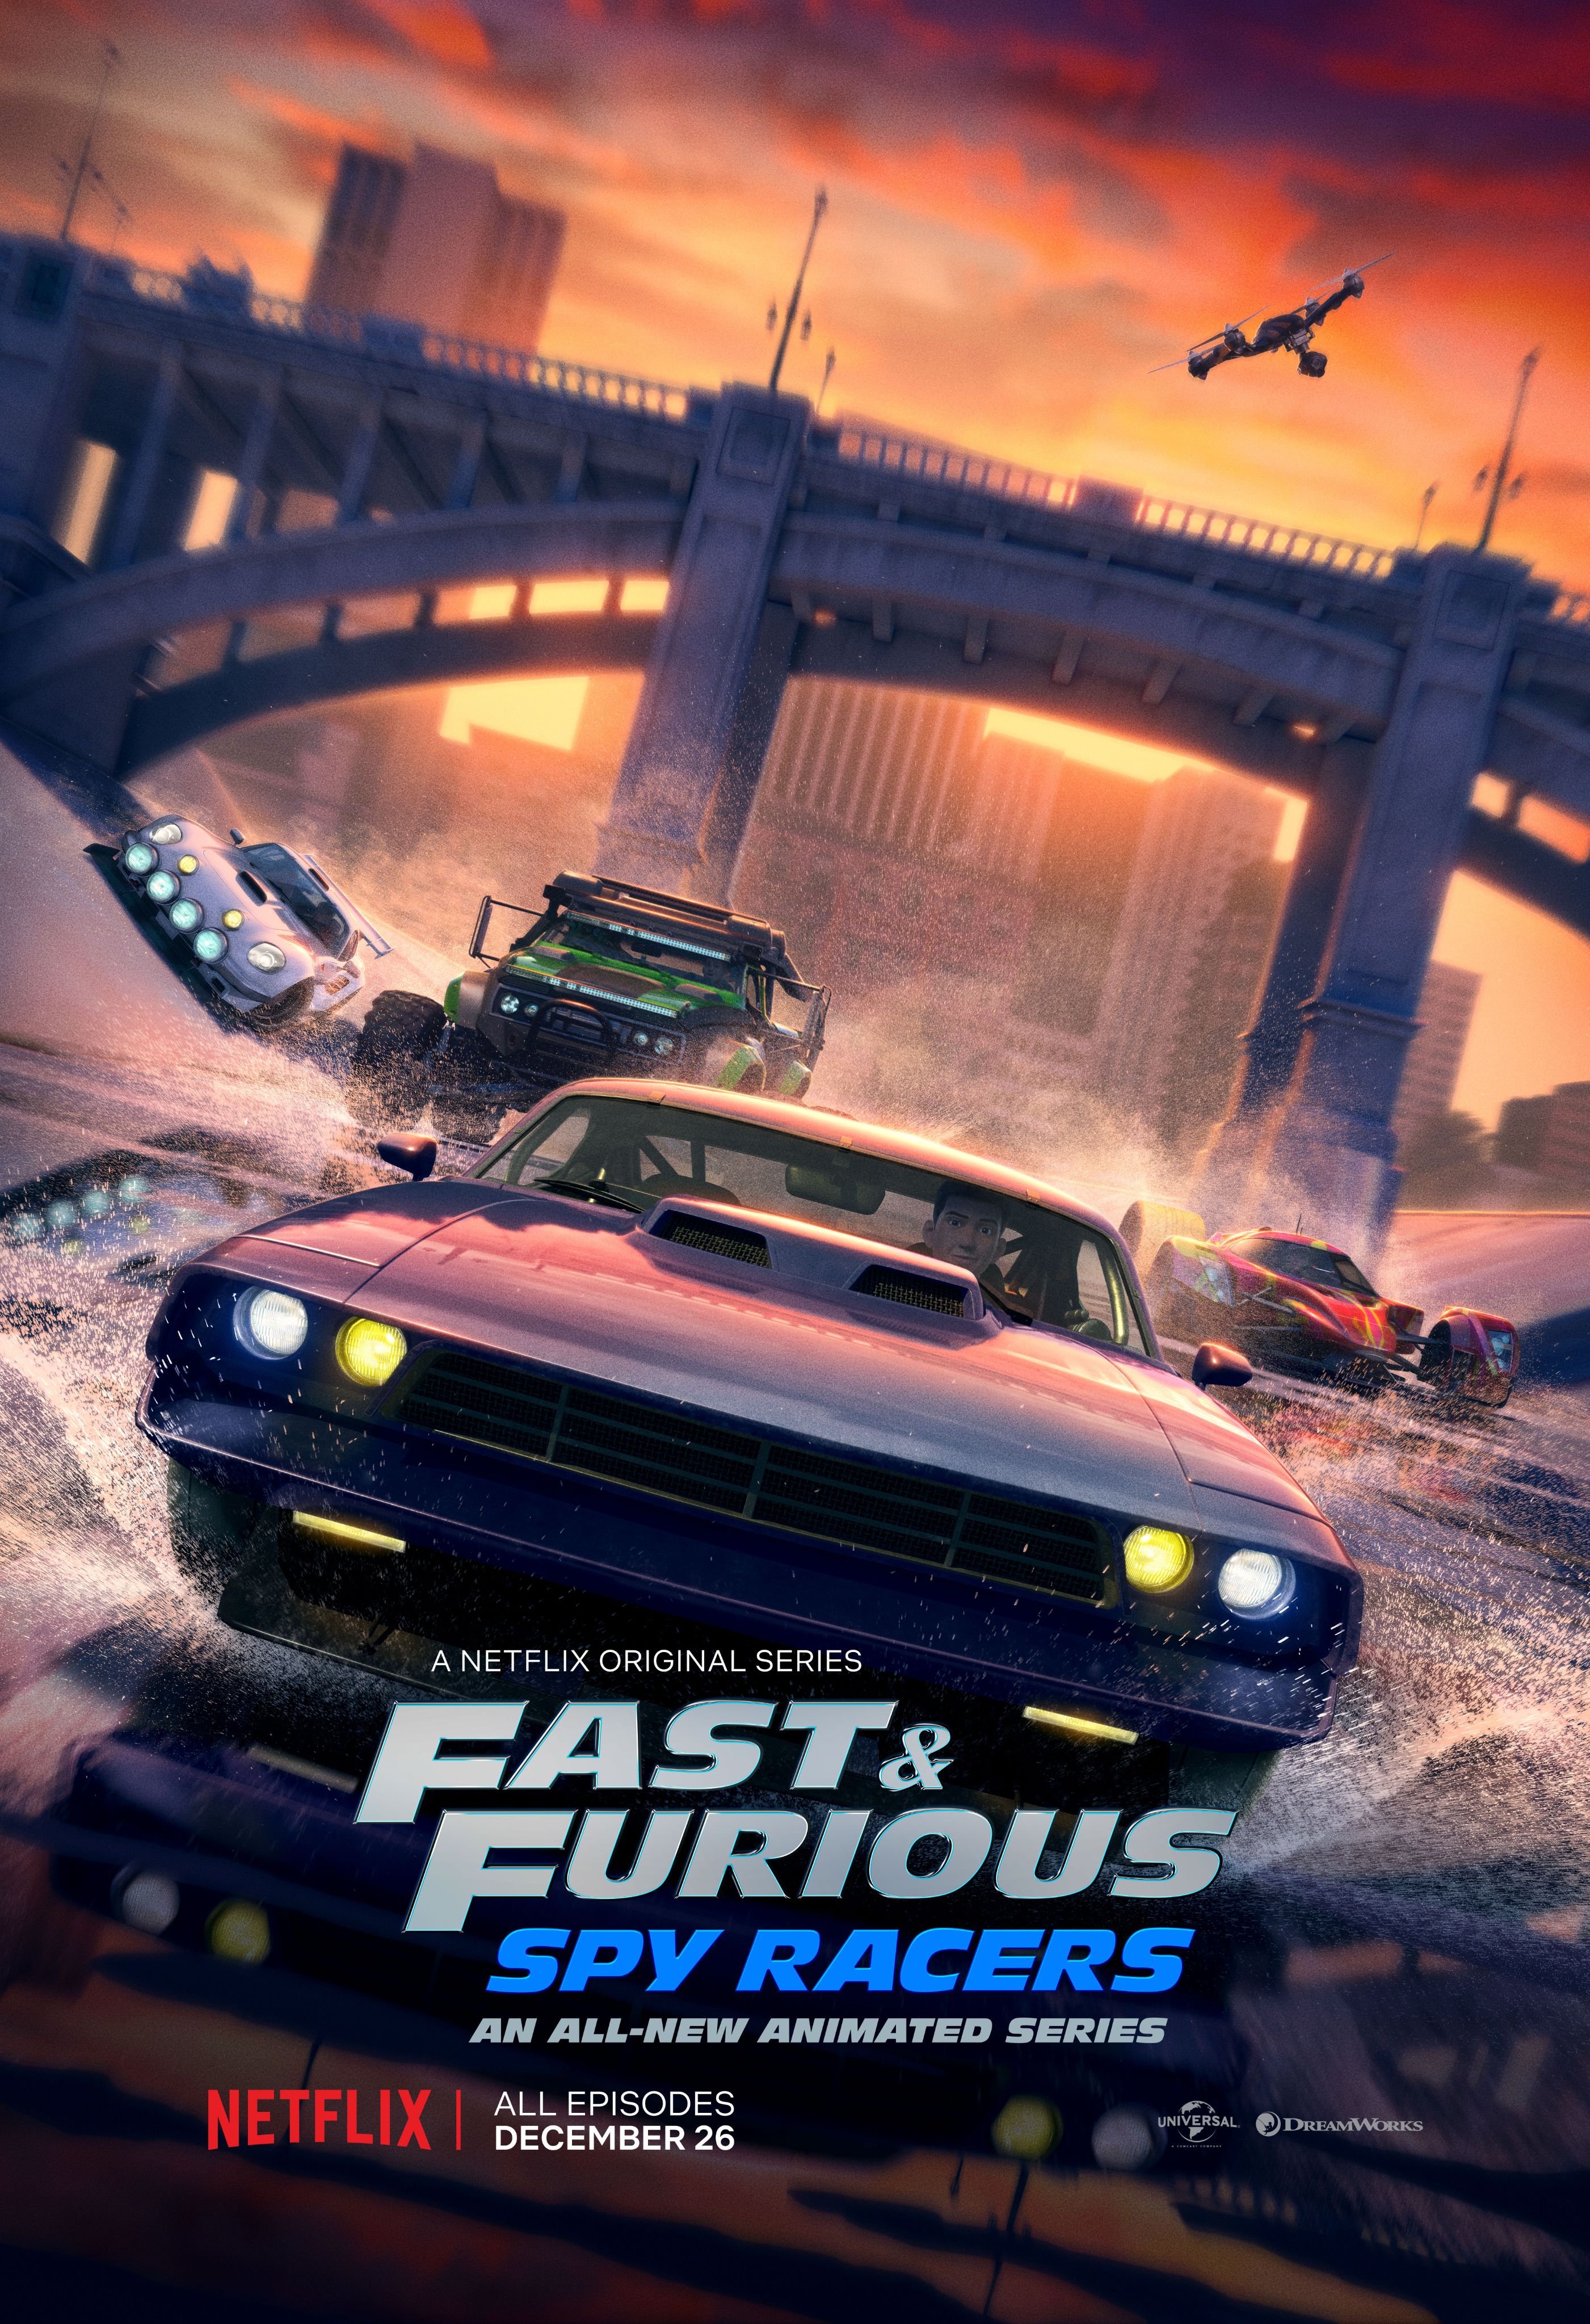 Netflix S Fast And Furious Animated Series First Look Photos Arrive